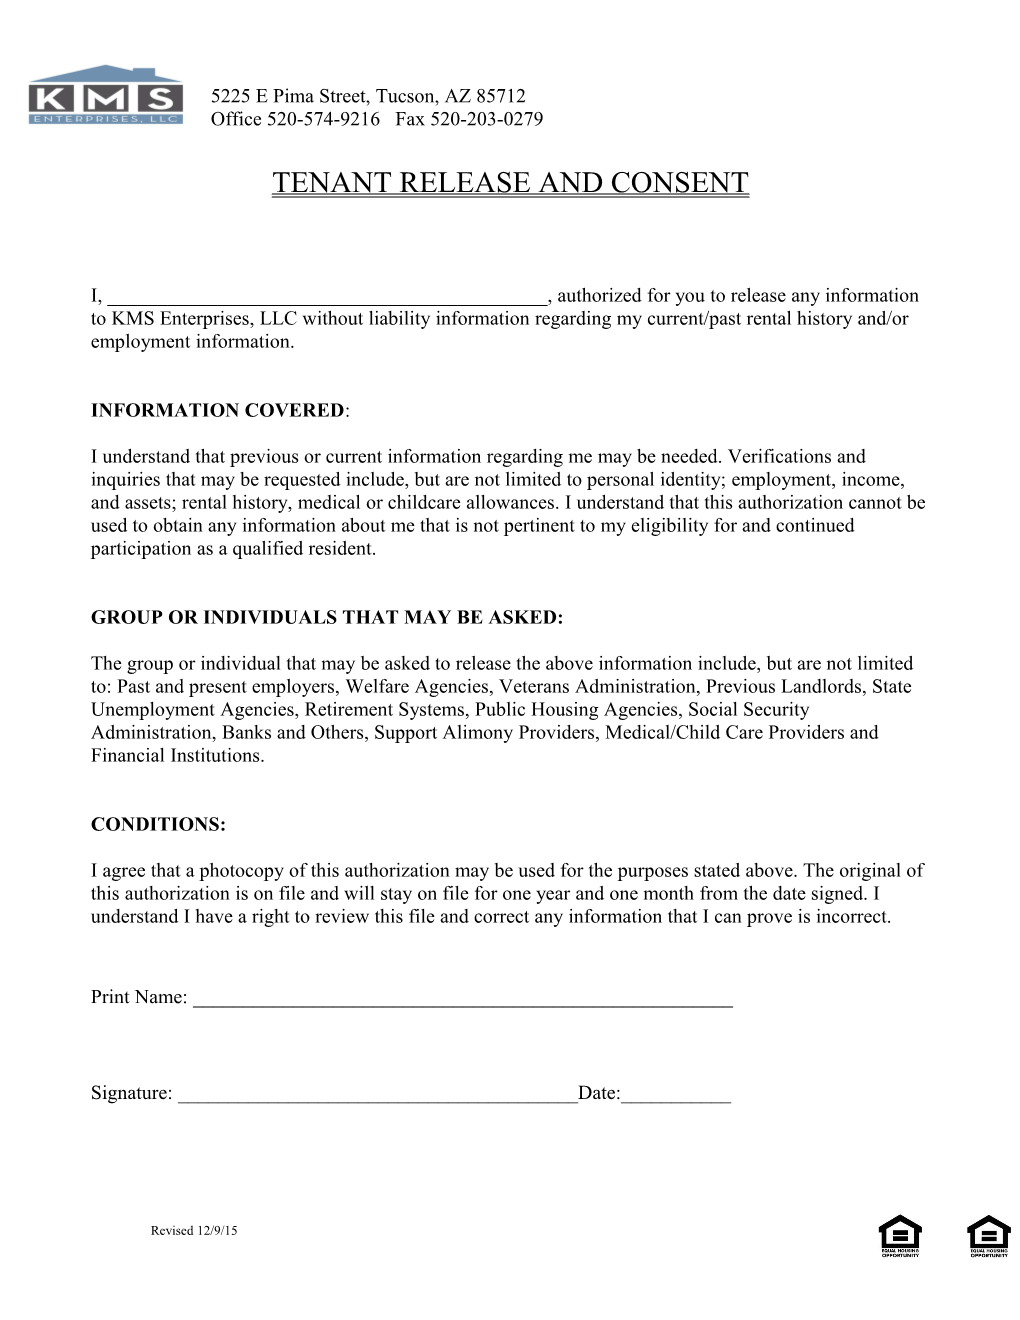 Tenant Release and Consent